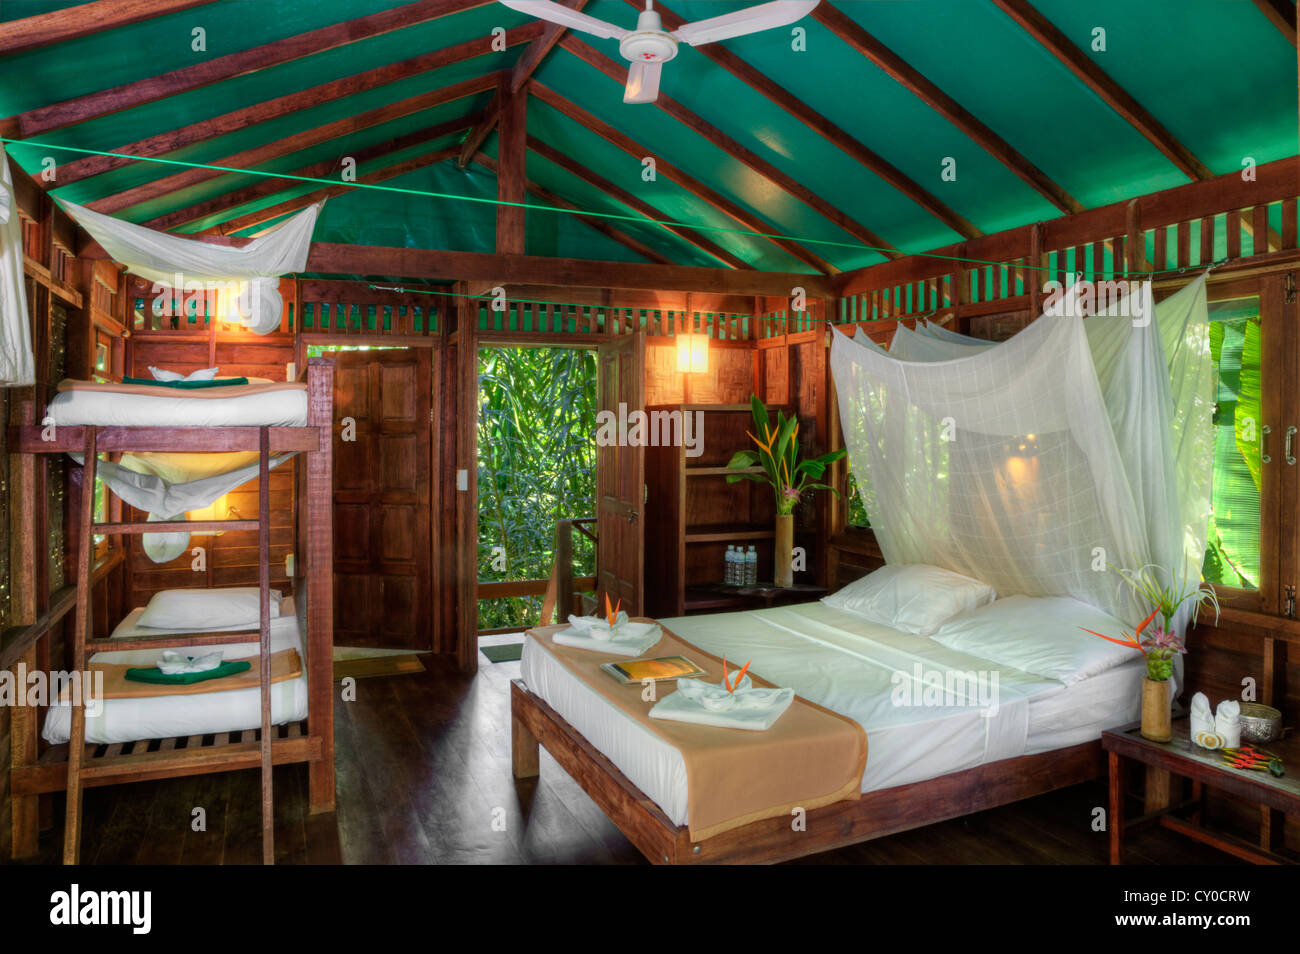 A TREE HOUSE interior at OUR JUNGLE HOUSE a lodge in the rainforest near KHAO SOK NATIONAL PARK - SURATHANI PROVENCE, THAILAND Stock Photo